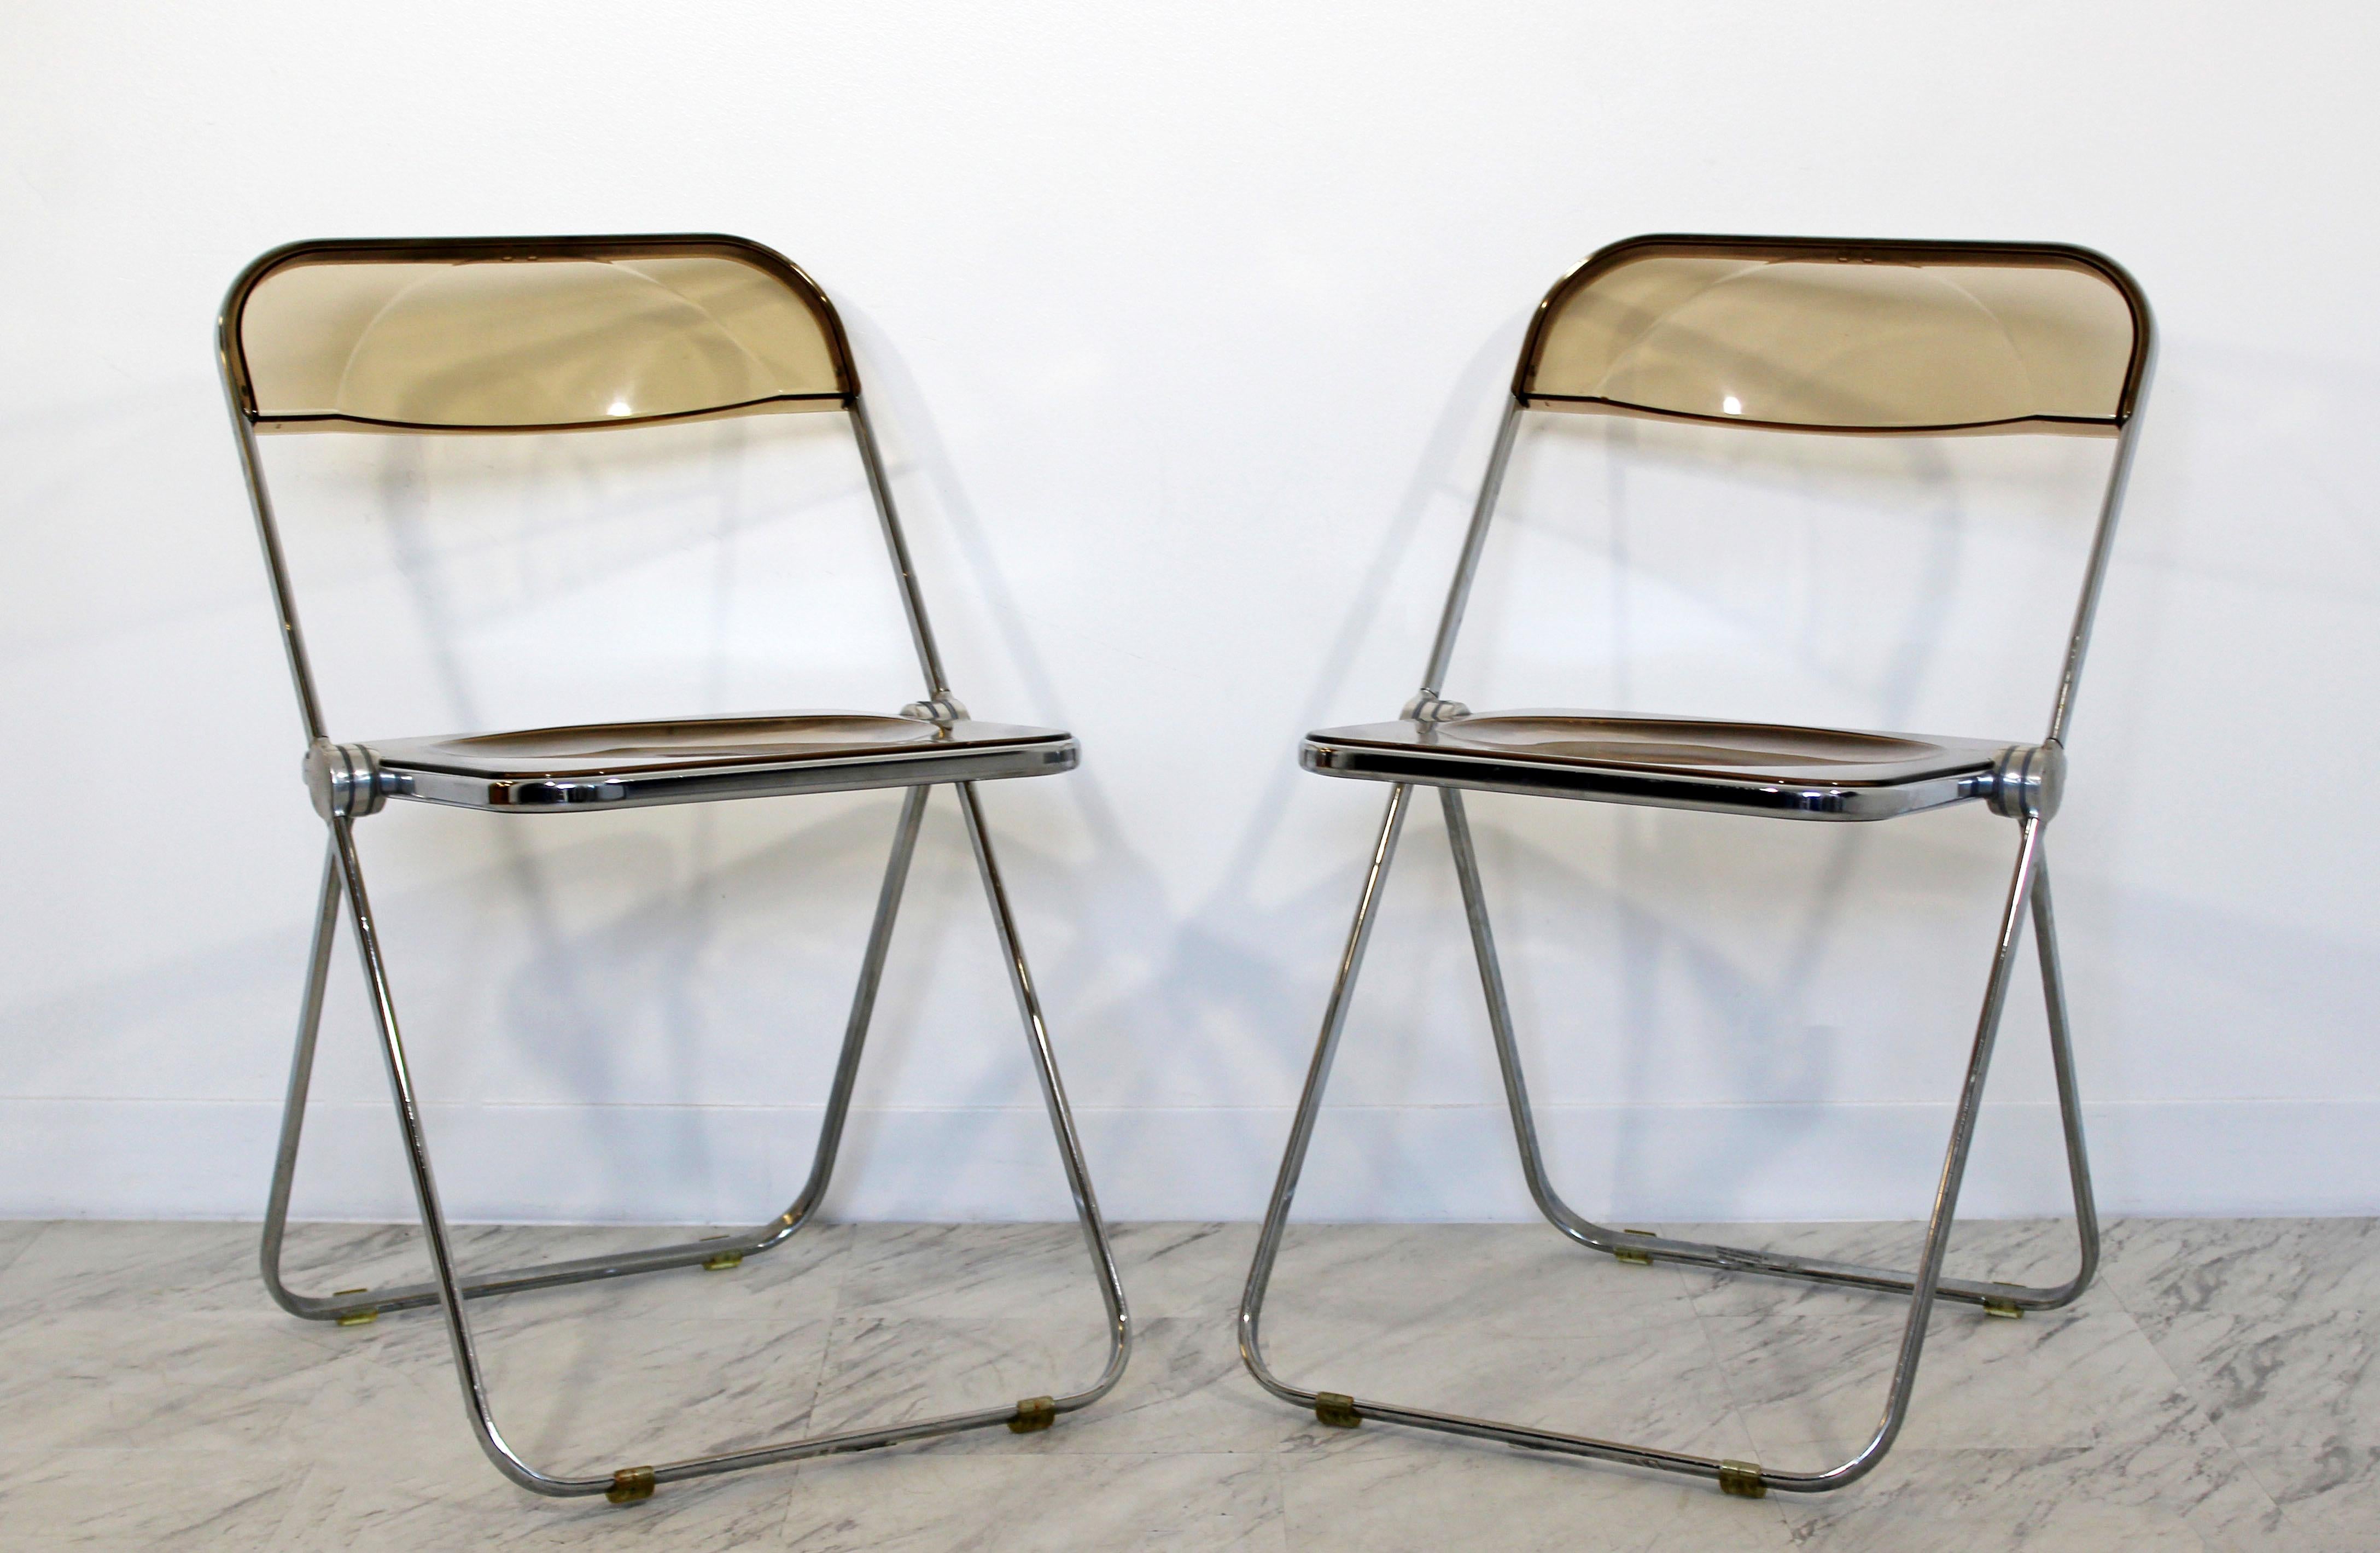 For your consideration is a wonderful set of ten folding chairs, made of chrome and smoked Lucite, by Castelli, made in Italy for Krueger, circa the 1960s. In good condition. The dimensions are 18.5